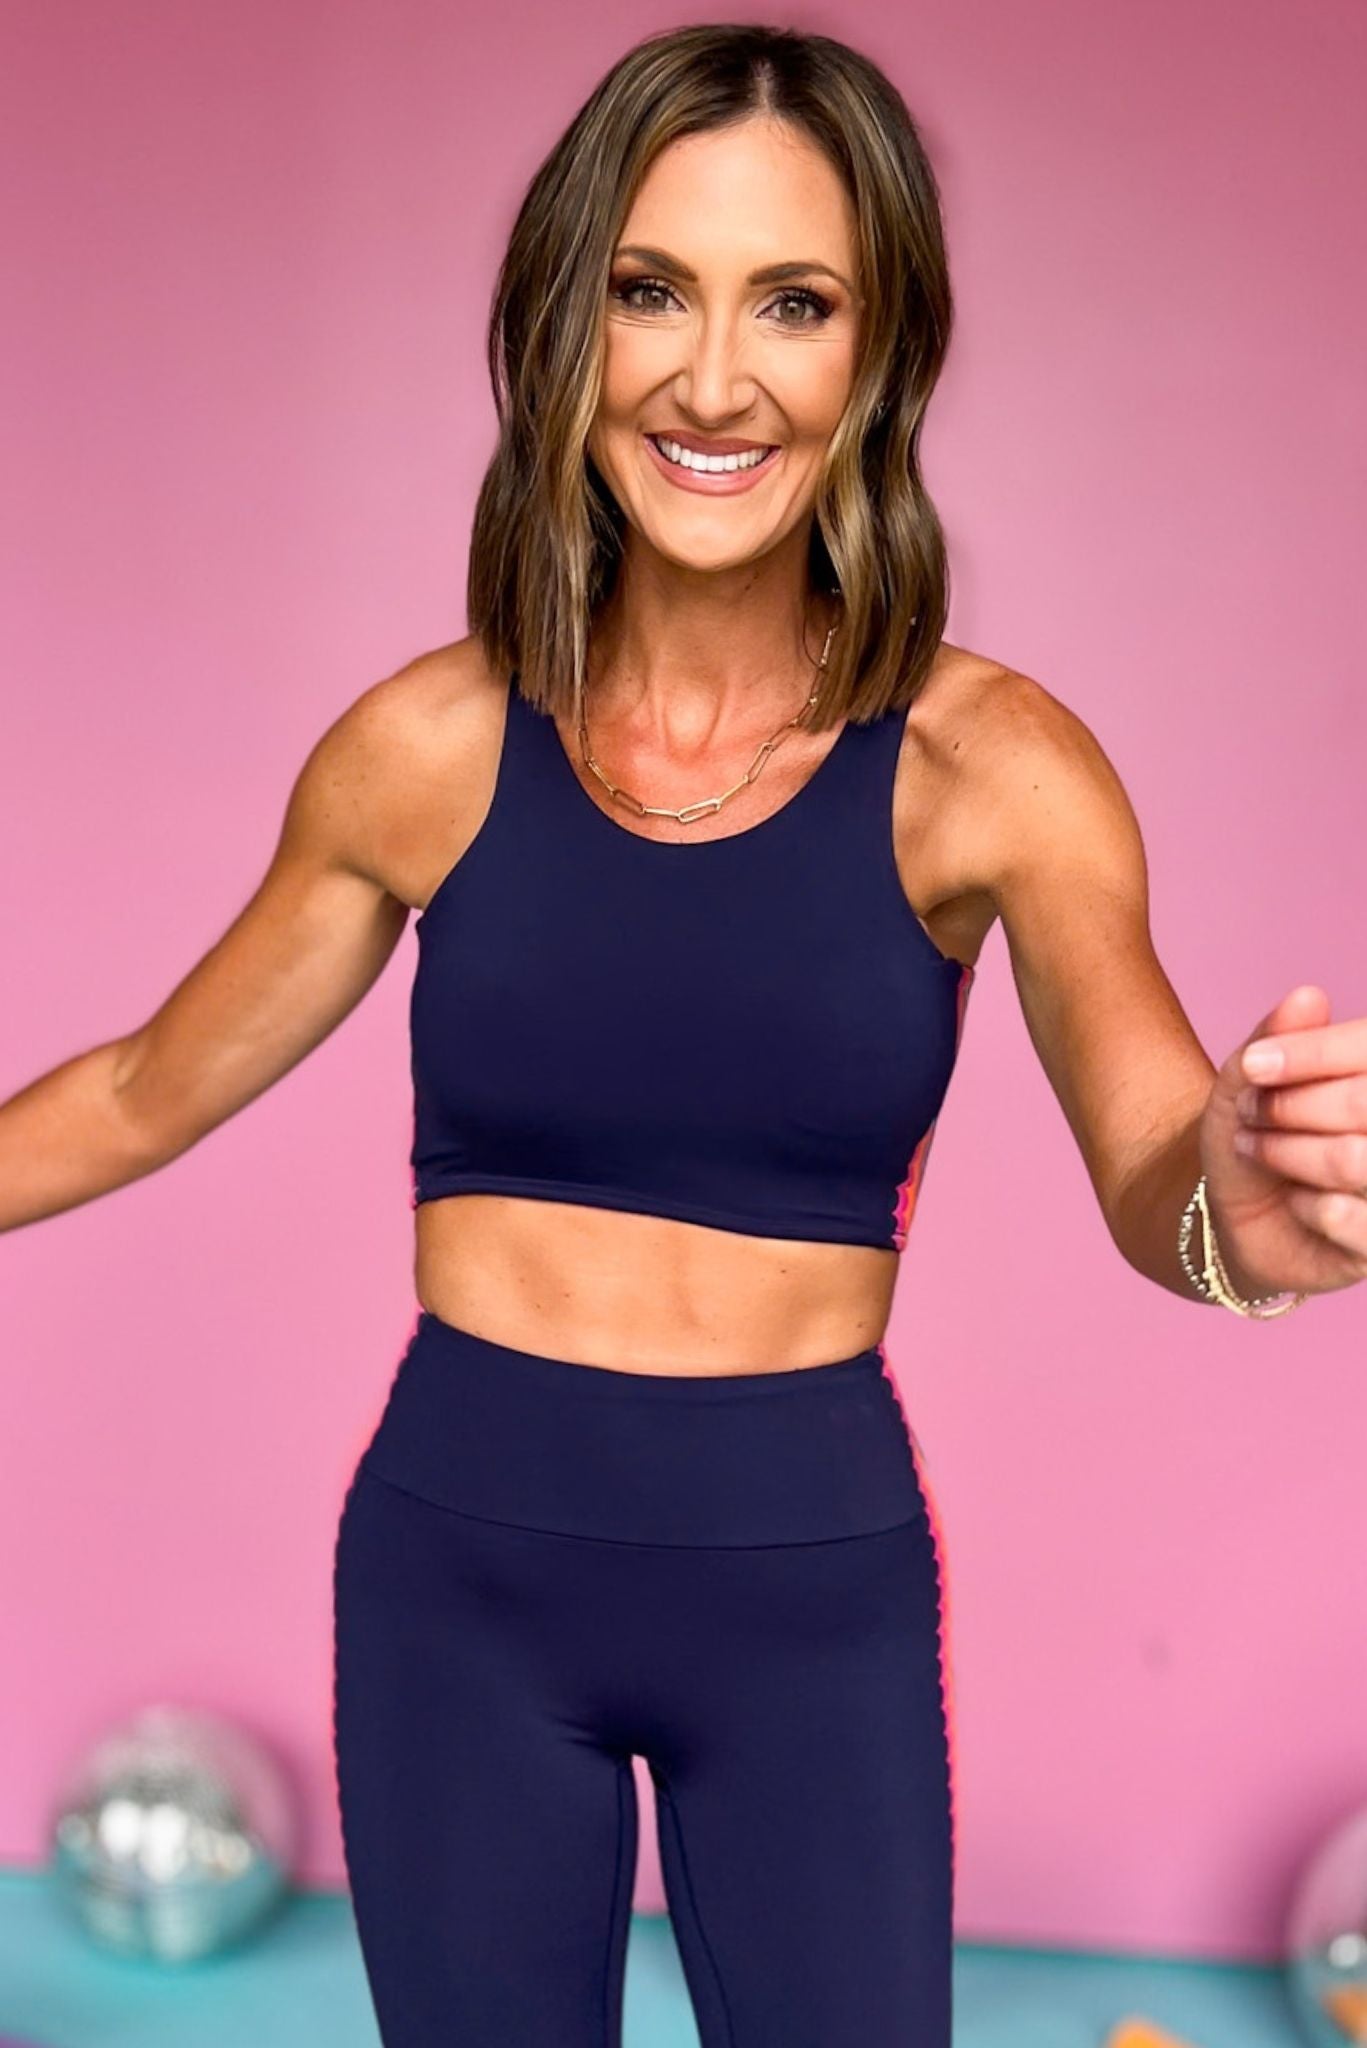 SSYS Multi Scallop Inset Navy Sports Bra, Spring athleisure, athleisure, elevated athleisure, must have sports bra, athletic sports bra, athletic style, mom style, shop style your senses by mallory fitzsimmons, ssys by mallory fitzsimmons